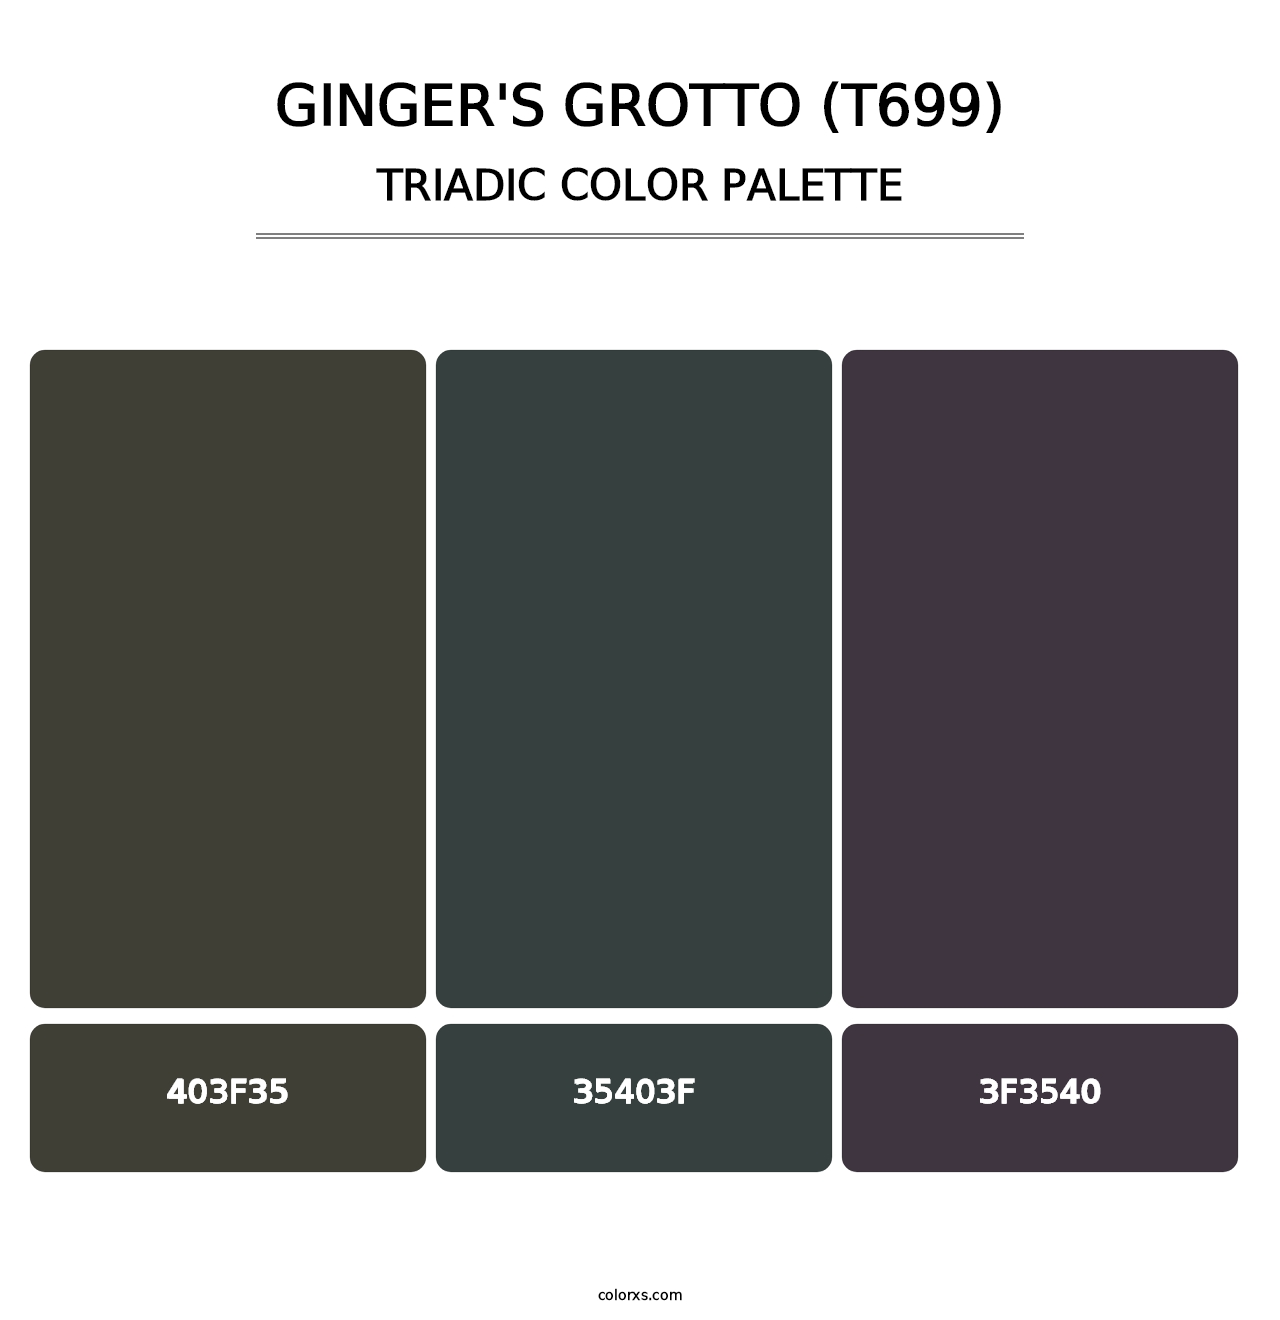 Ginger's Grotto (T699) - Triadic Color Palette